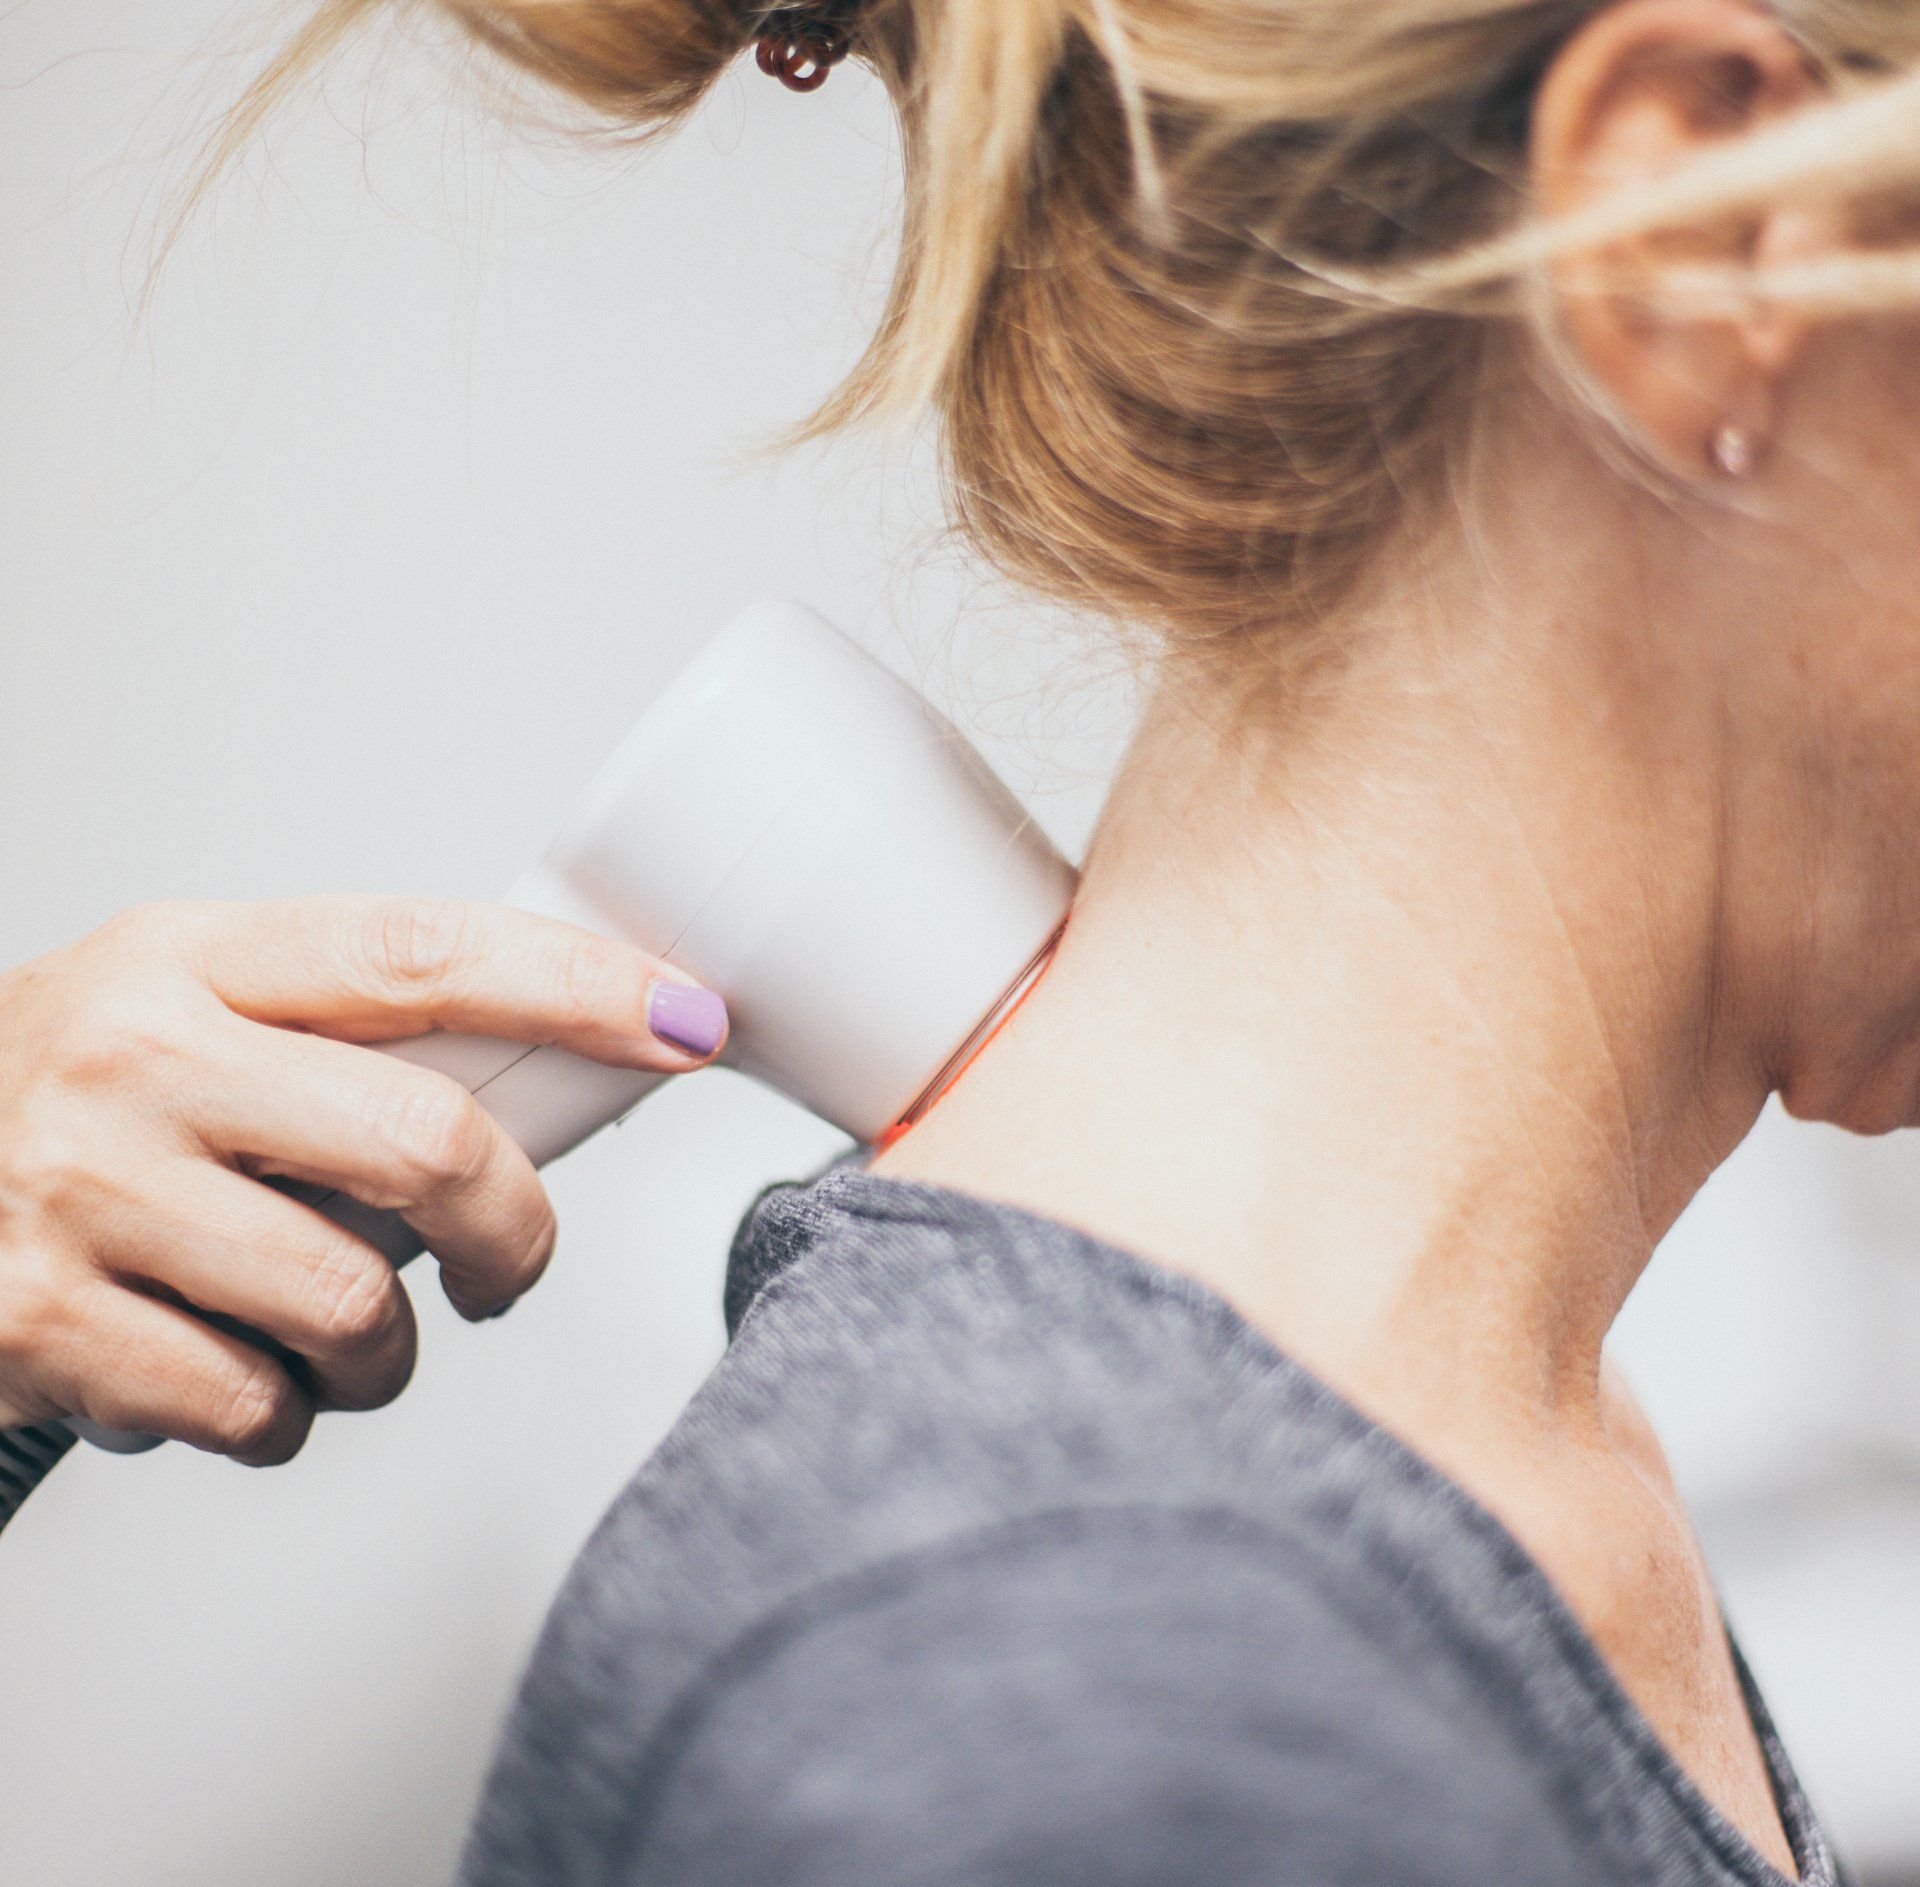 a woman with purple nail polish is using a device on her neck